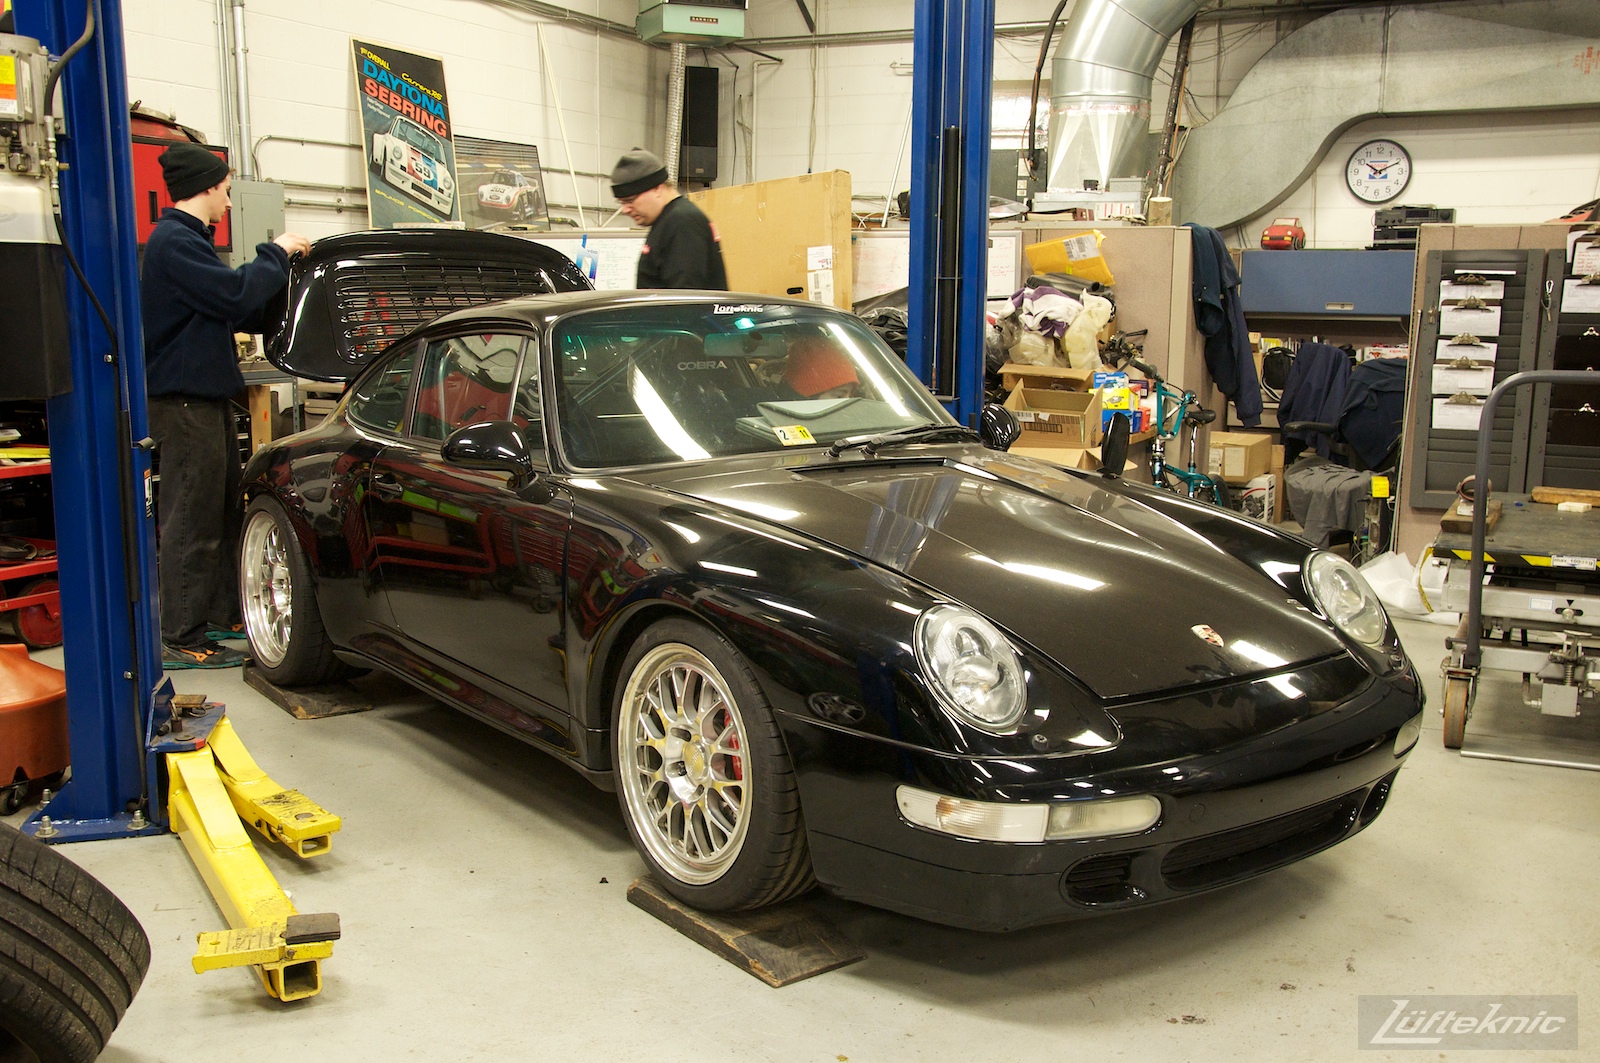 The 993 Turbo is back on the ground show from the front, with the driveline installed.